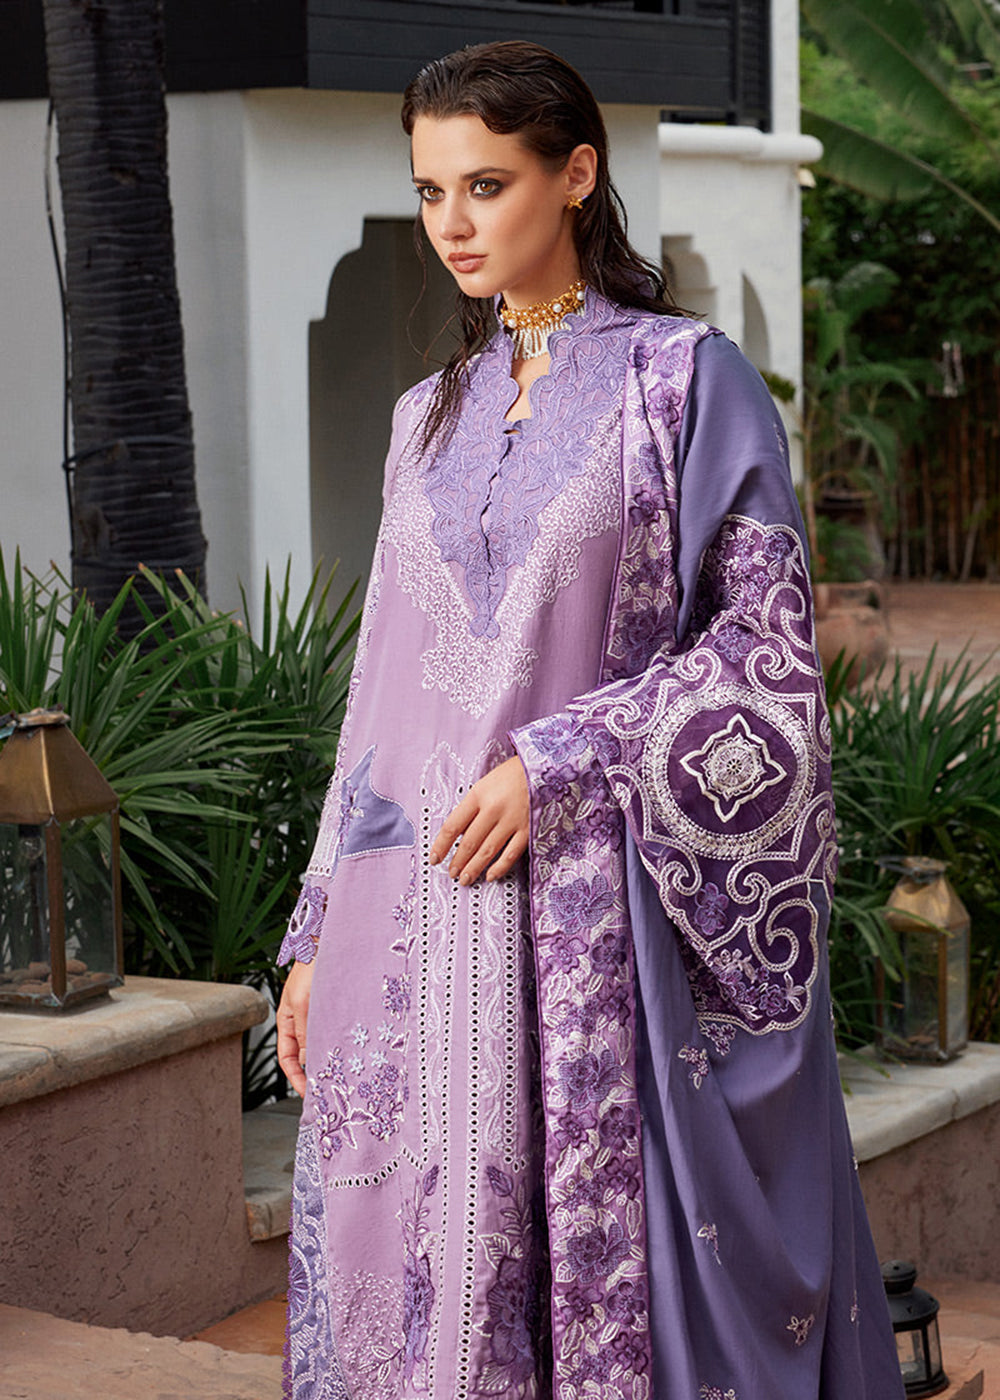 Buy Now Moroccan Dreams '23 by Mushq - ADILAH at Empress Online in USA, UK, Canada & Worldwide at Empress Clothing. 